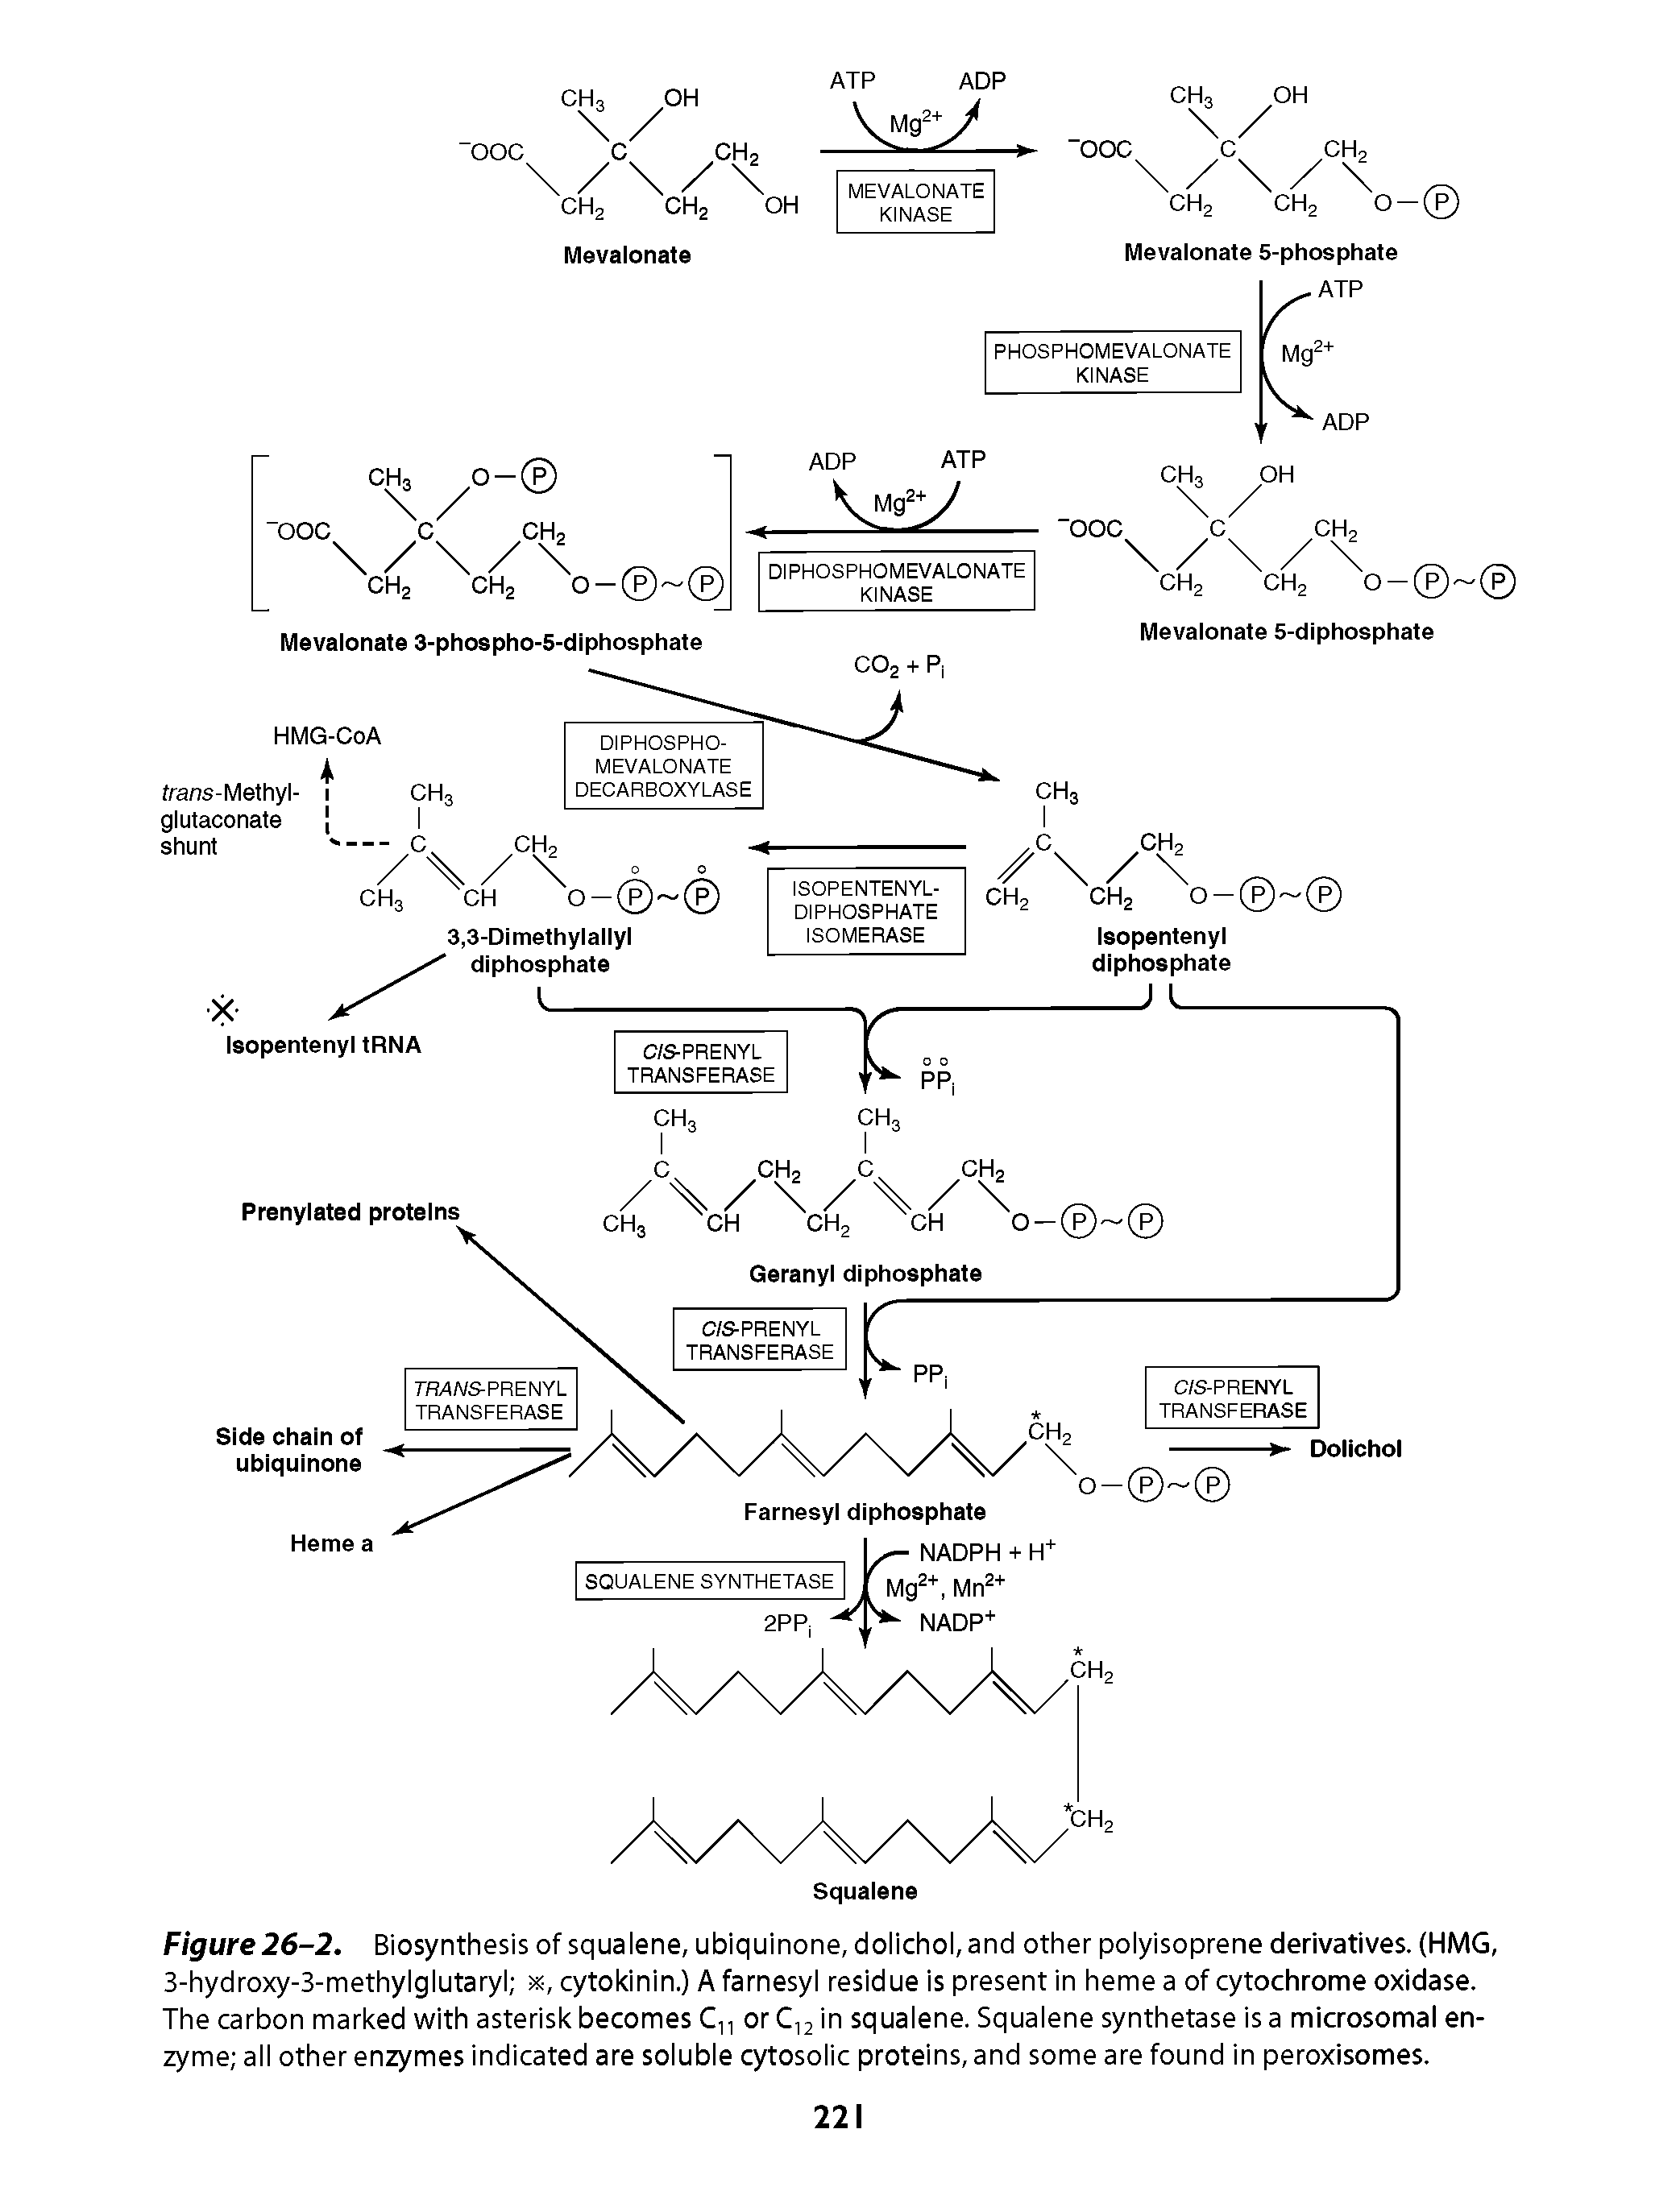 Figure26-2. Biosynthesis of squalene, ubiquinone, dolichol, and other polyisoprene derivatives. (HMG, 3-hydroxy-3-methylglutaryl x, cytokinin.) A farnesyl residue is present in heme a of cytochrome oxidase. The carbon marked with asterisk becomes C or C,2 in squalene. Squalene synthetase is a microsomal enzyme all other enzymes indicated are soluble cytosolic proteins, and some are found in peroxisomes.